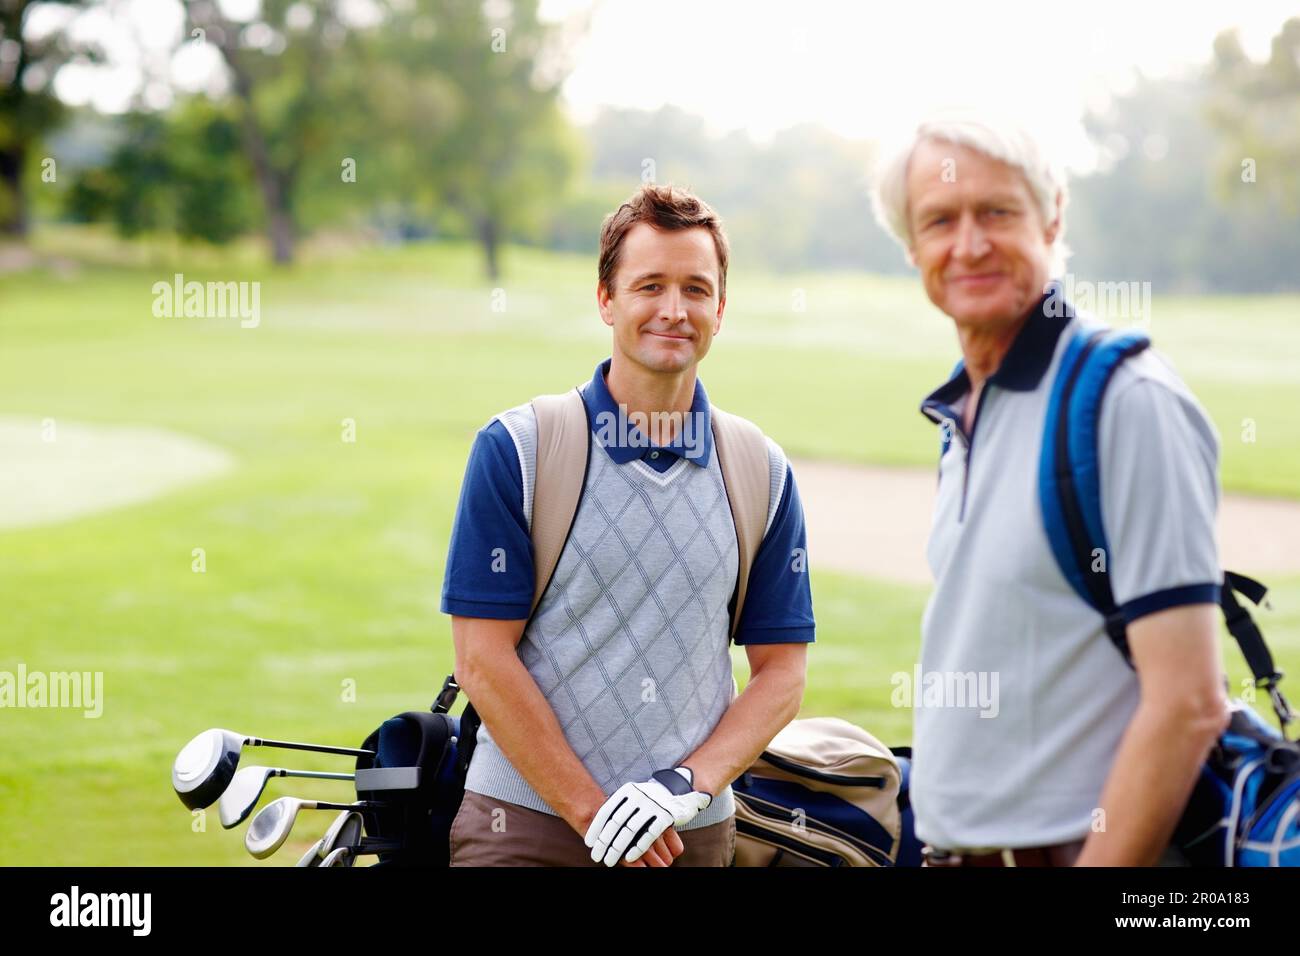 Golfers smiling. Portrait of father and son standing on golf course and giving you an attractive smile. Stock Photo